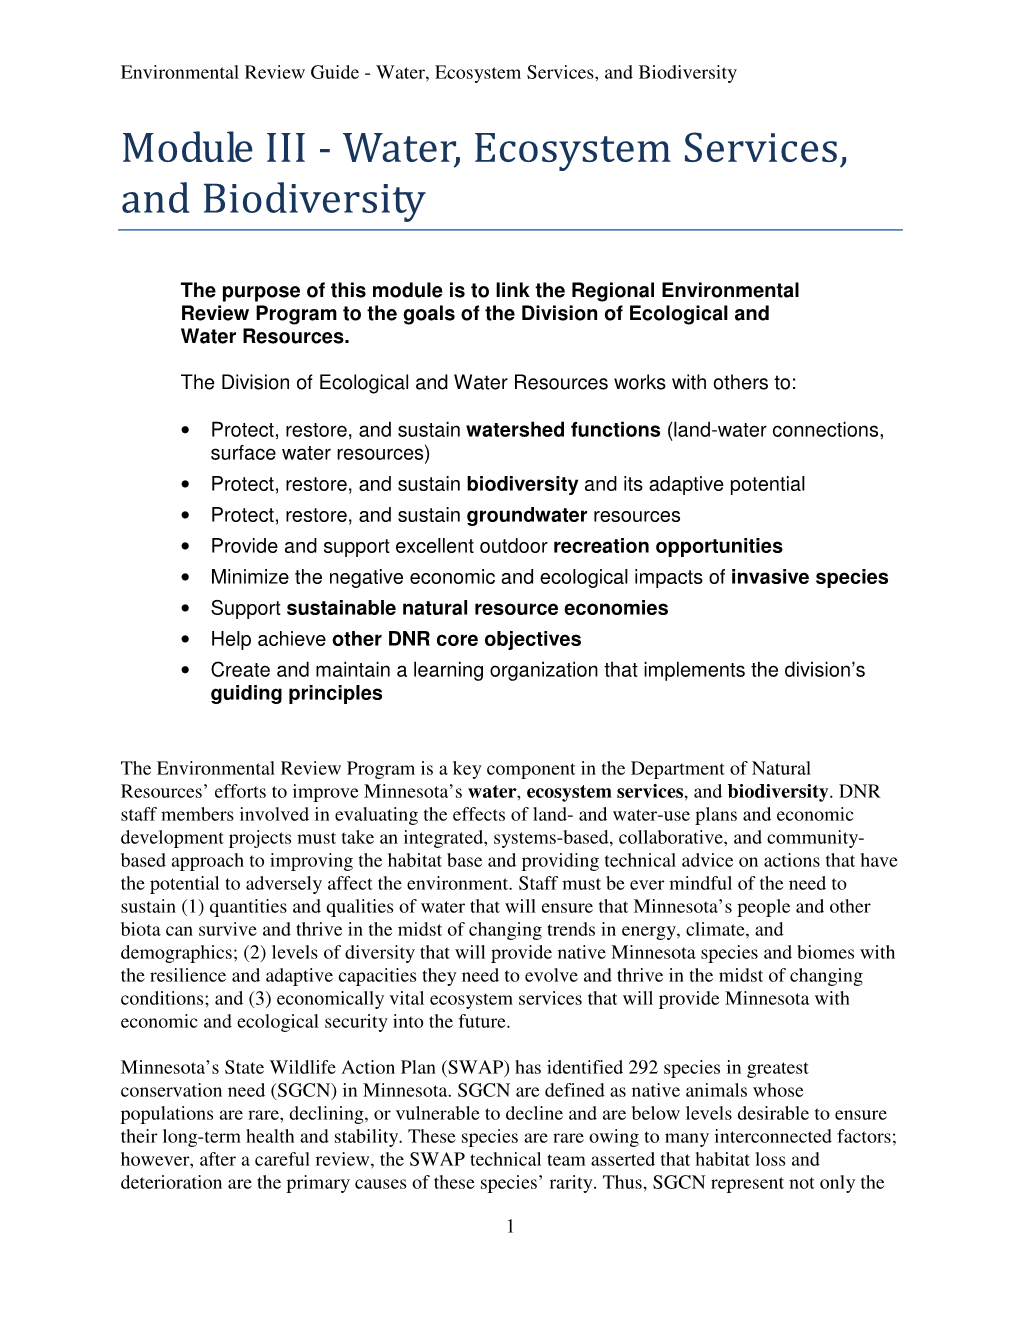 Module III - Water, Ecosystem Services, and Biodiversity